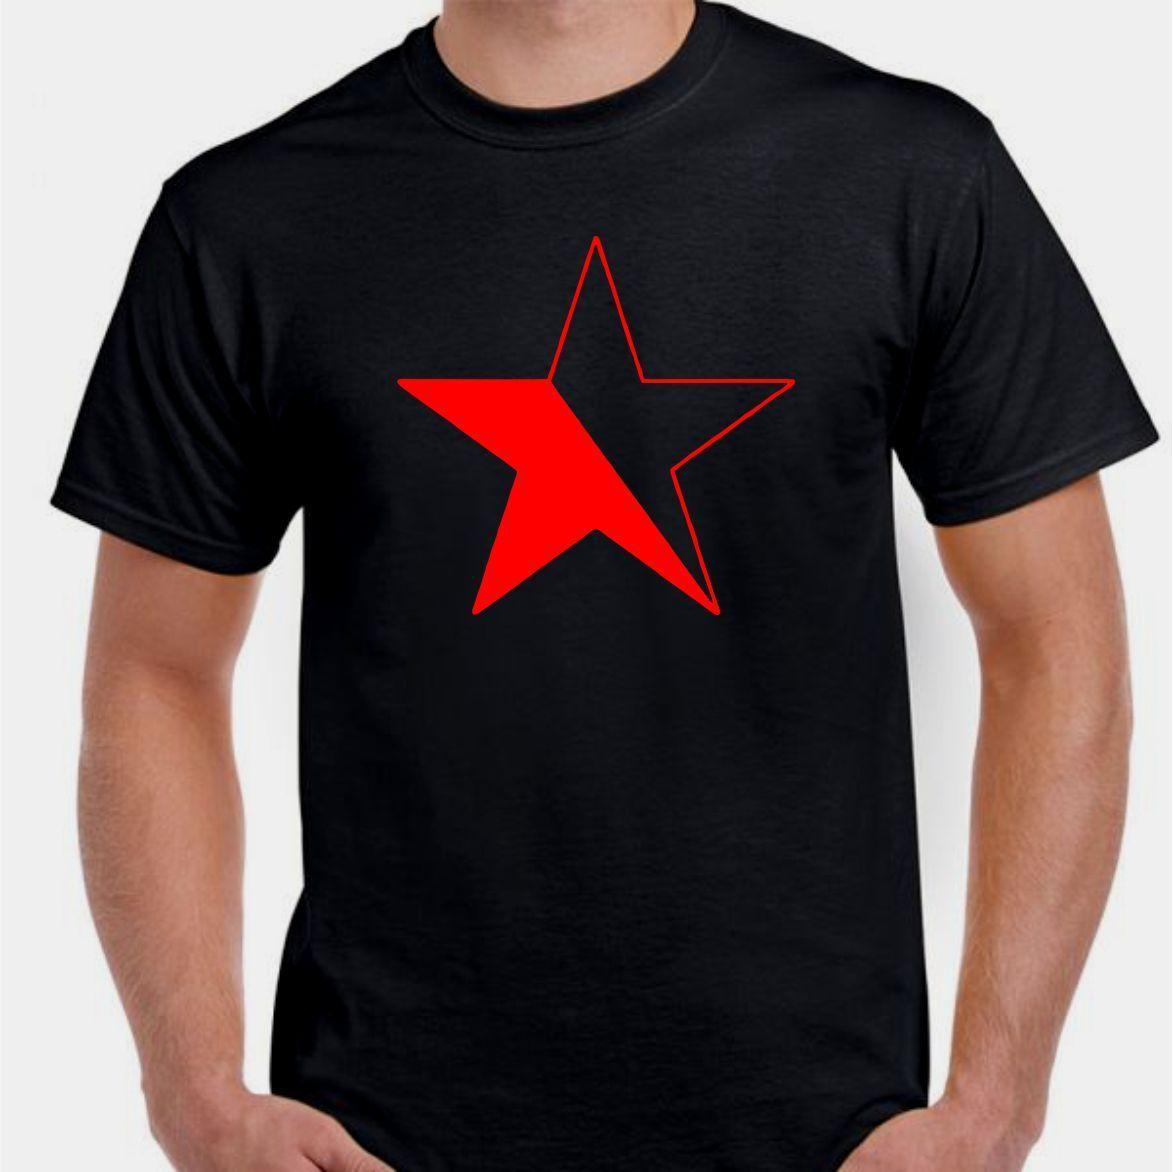 Red Star and the Letter T with a Logo - Anarchy Anarcho Communism Red Star Revolt Revolution T Shirt 100 ...